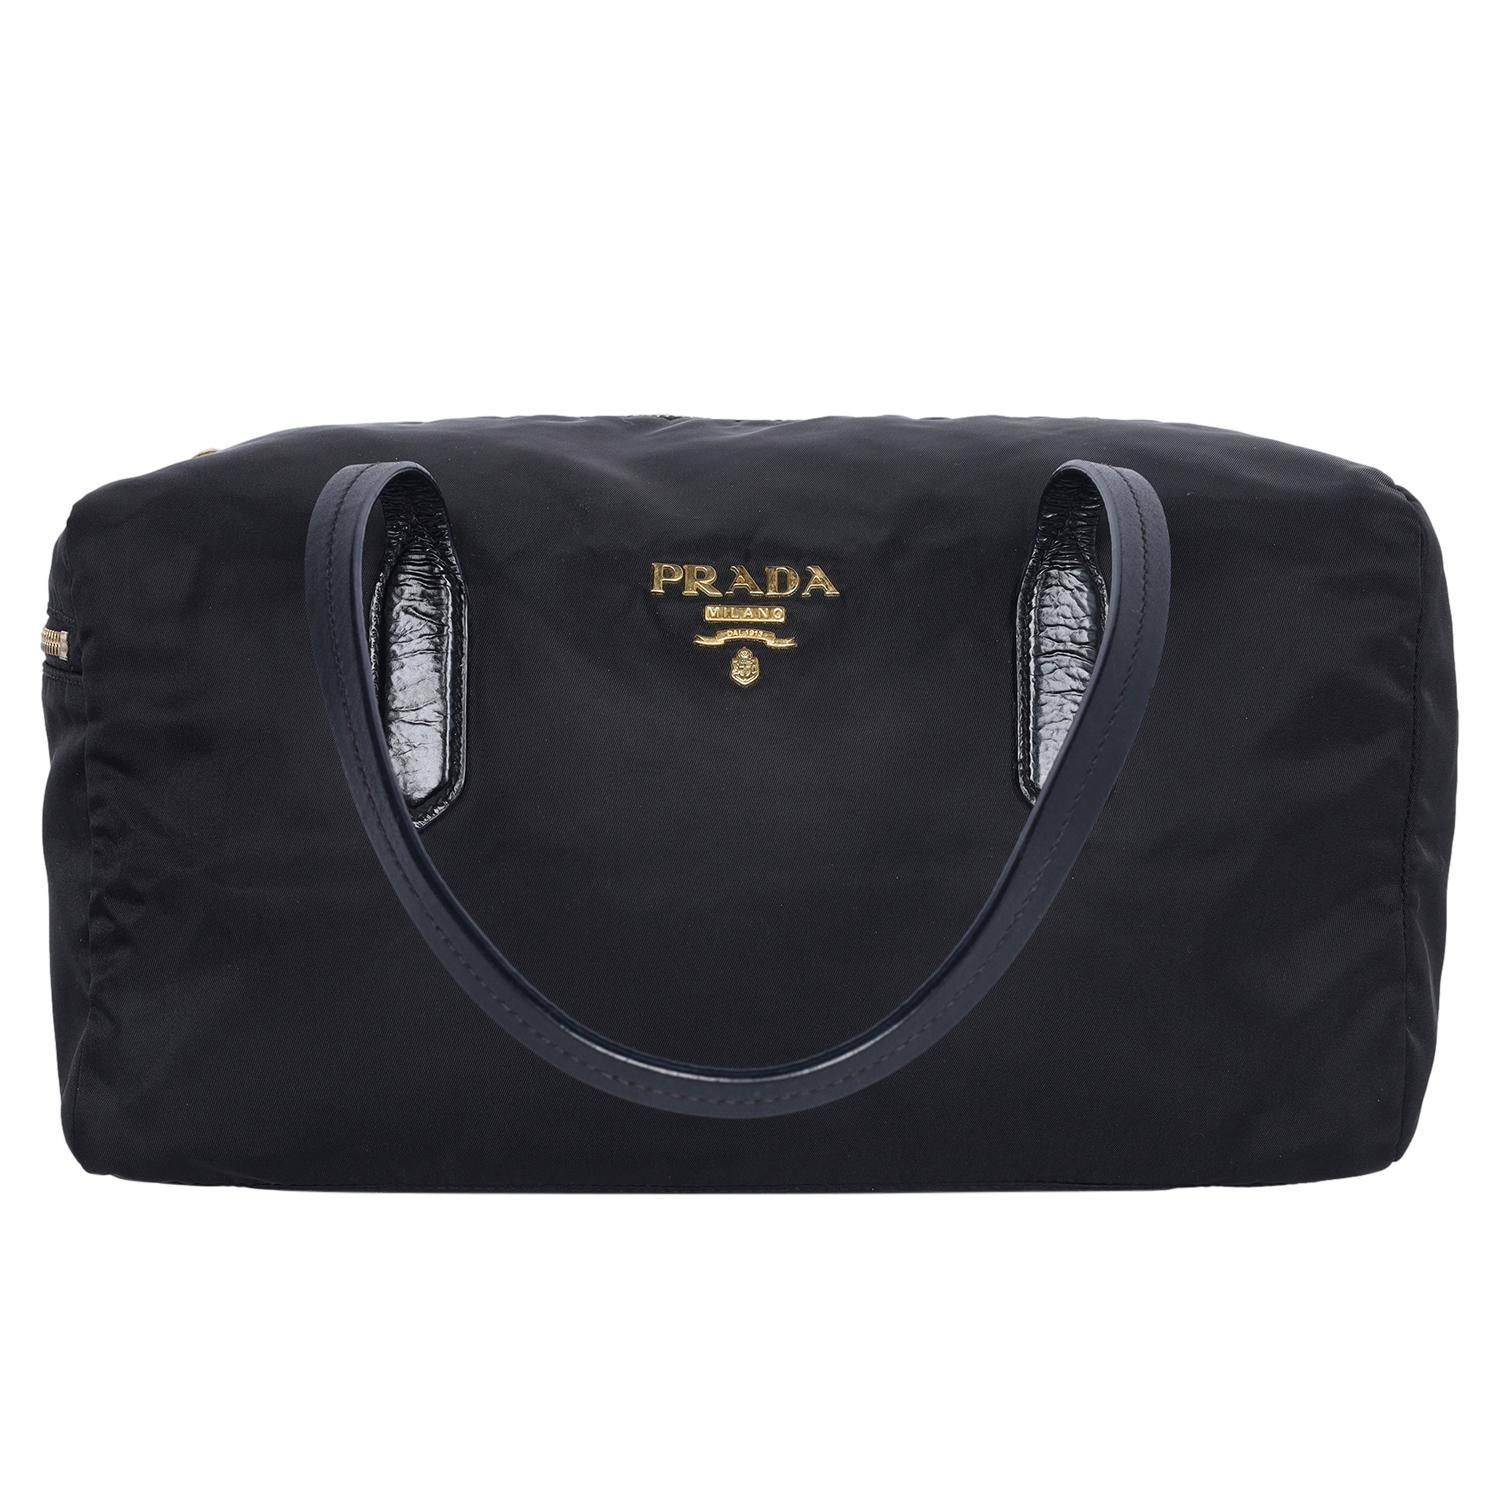 Authentic, pre-loved Prada Tessuto black nylon duffle shoulder bag. This bag features a nylon body, zipper top closure, side zipper pocket, gold Prada decal on the front, leather shoulder straps, gold hardware and large interior with a zipper slip